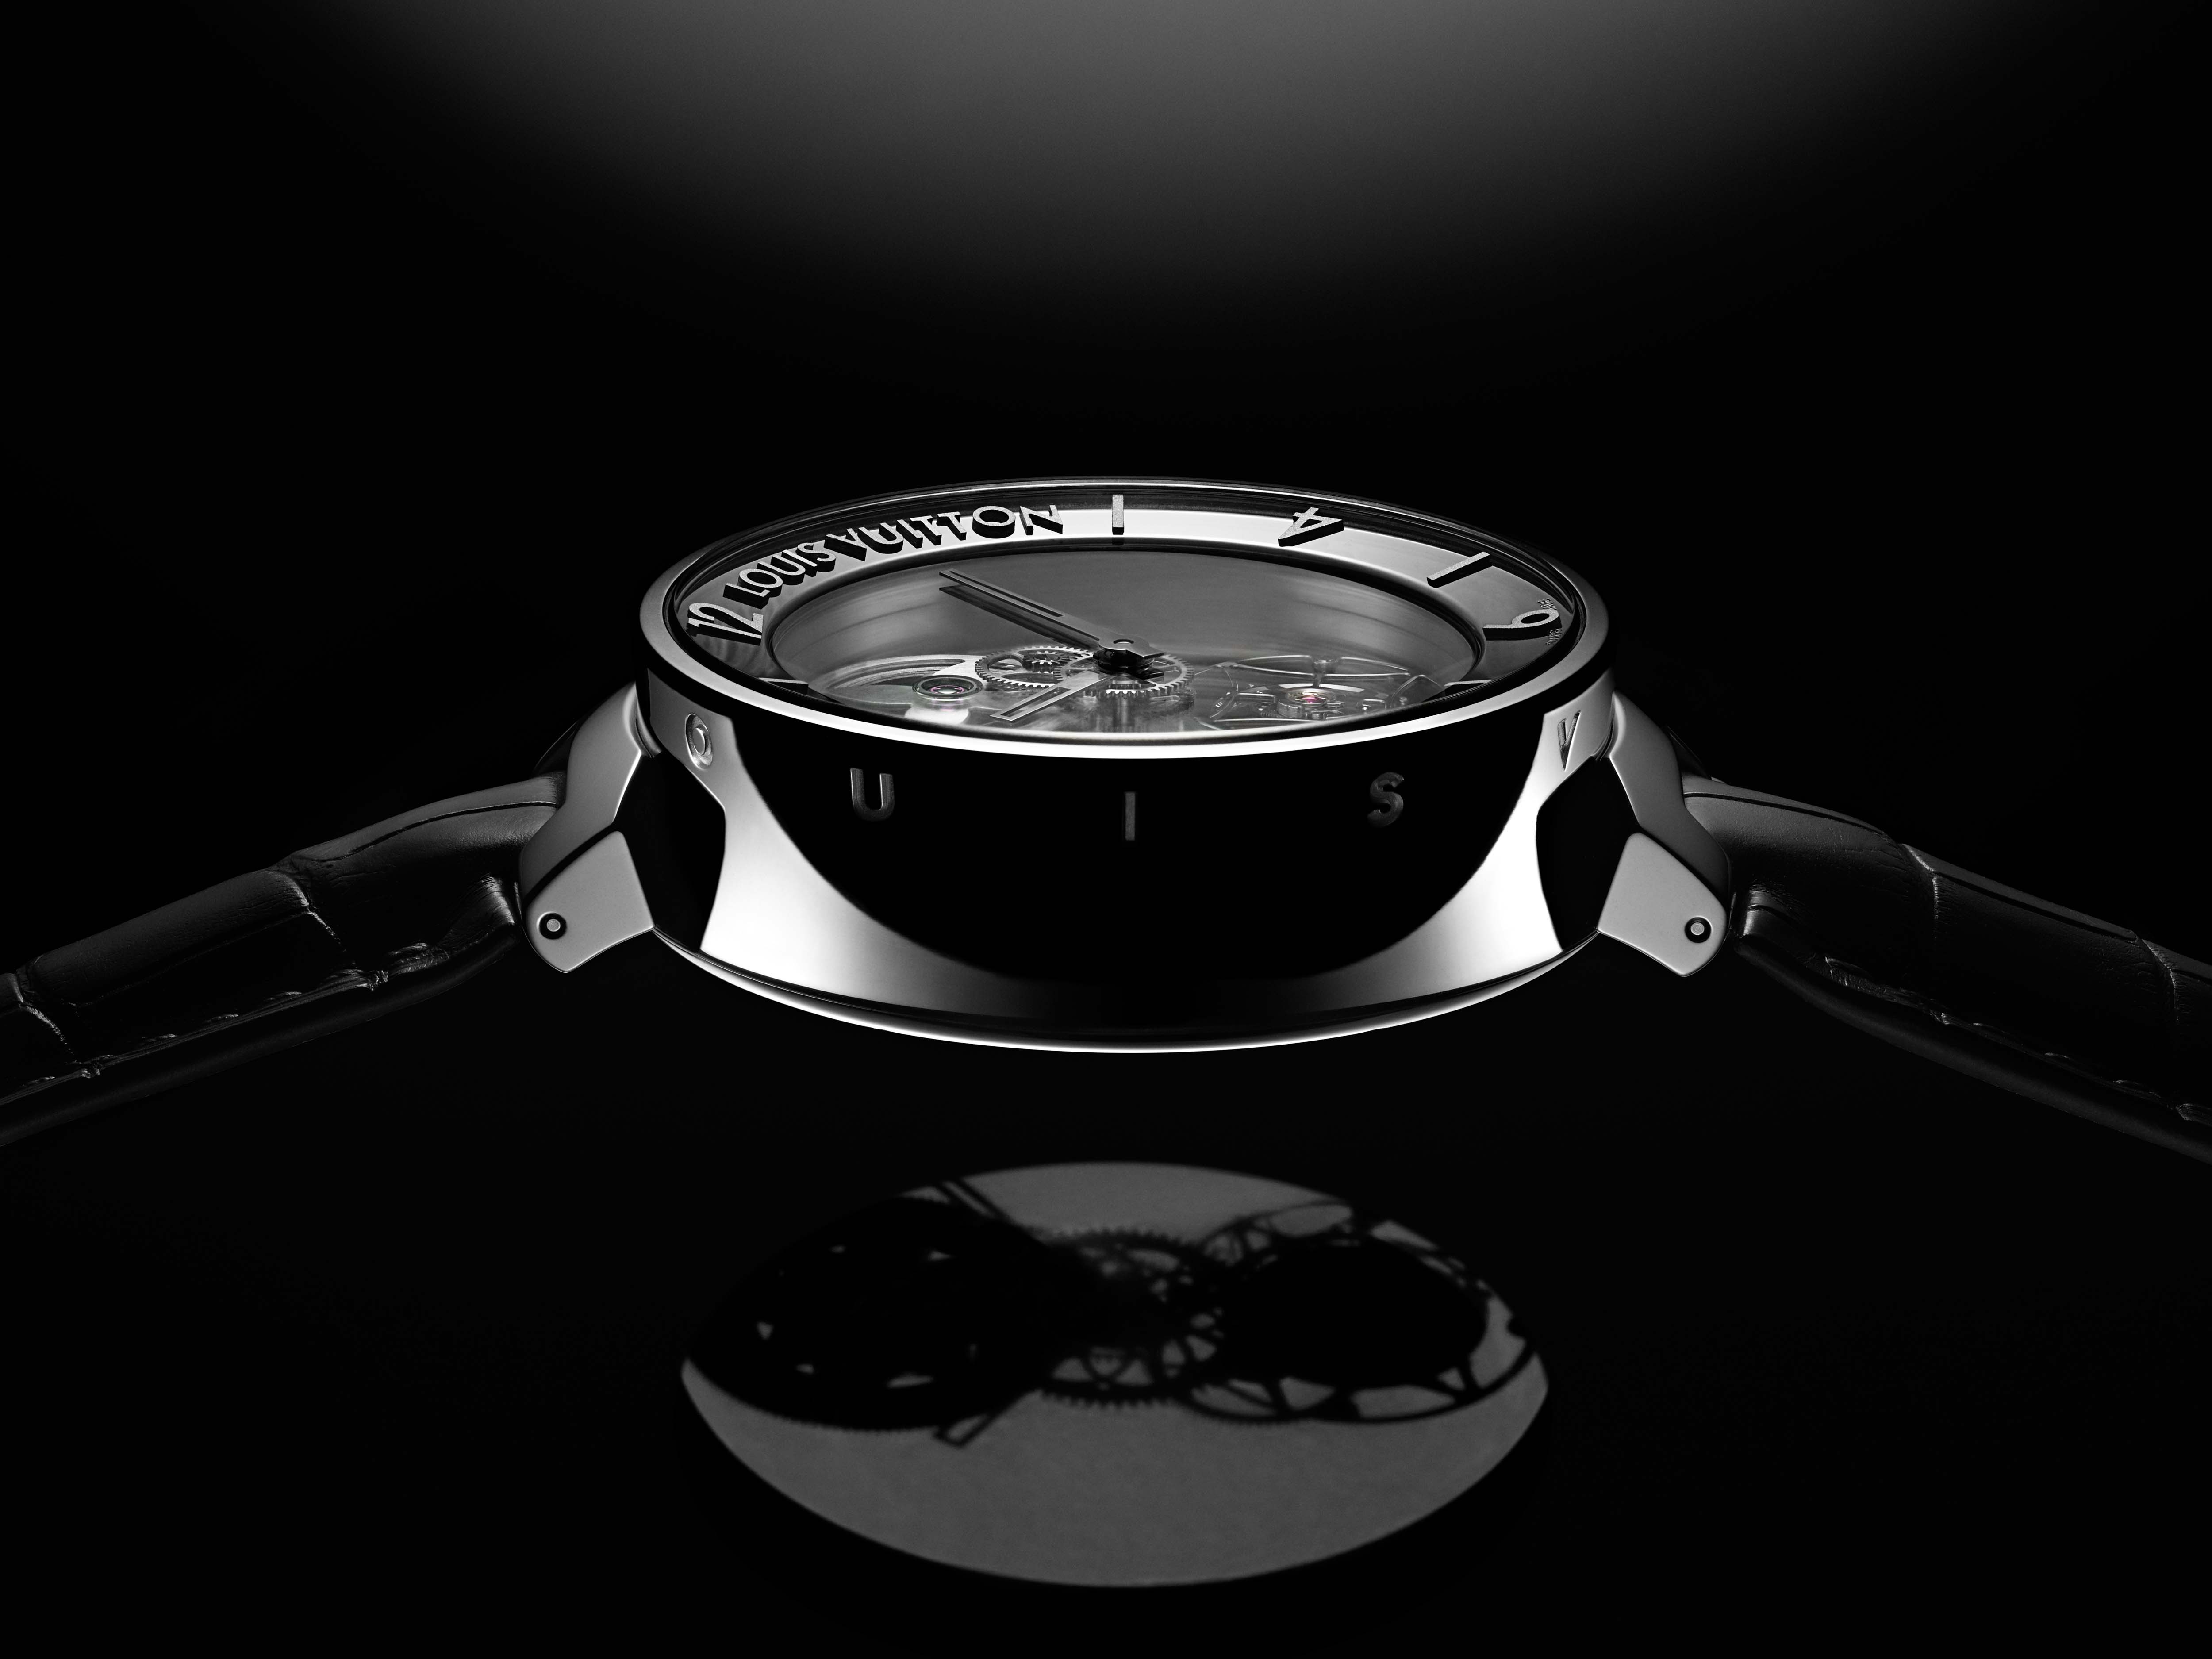 Just because – the incredible Louis Vuitton Tambour Moon Flying